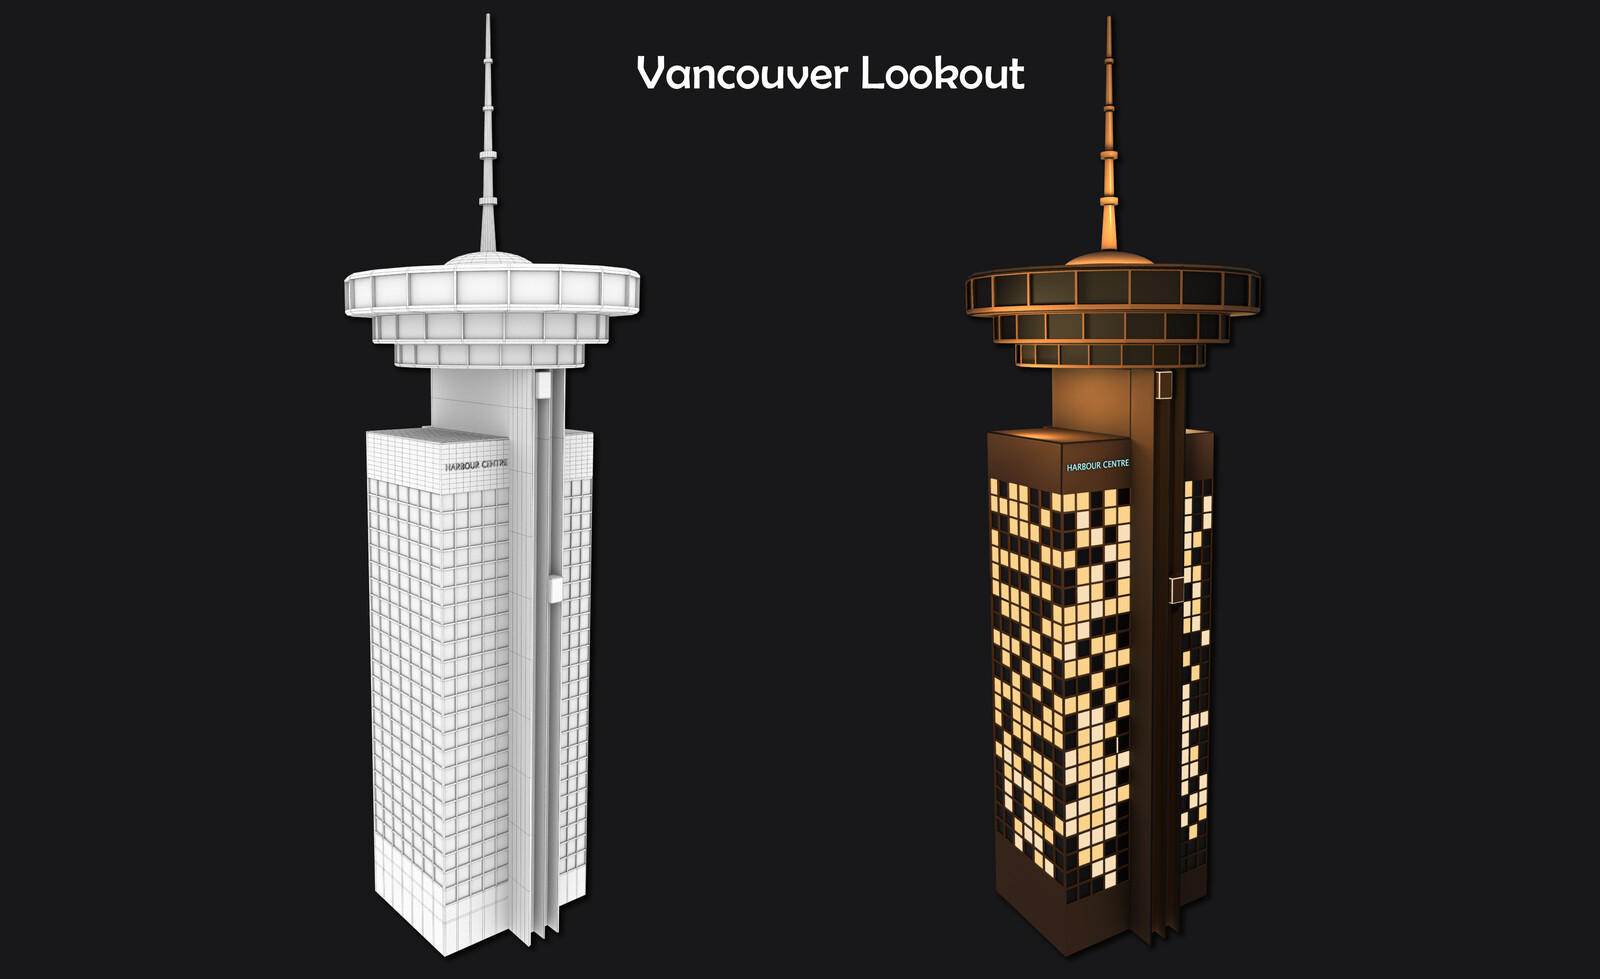 ASSET: Vancouver Lookout